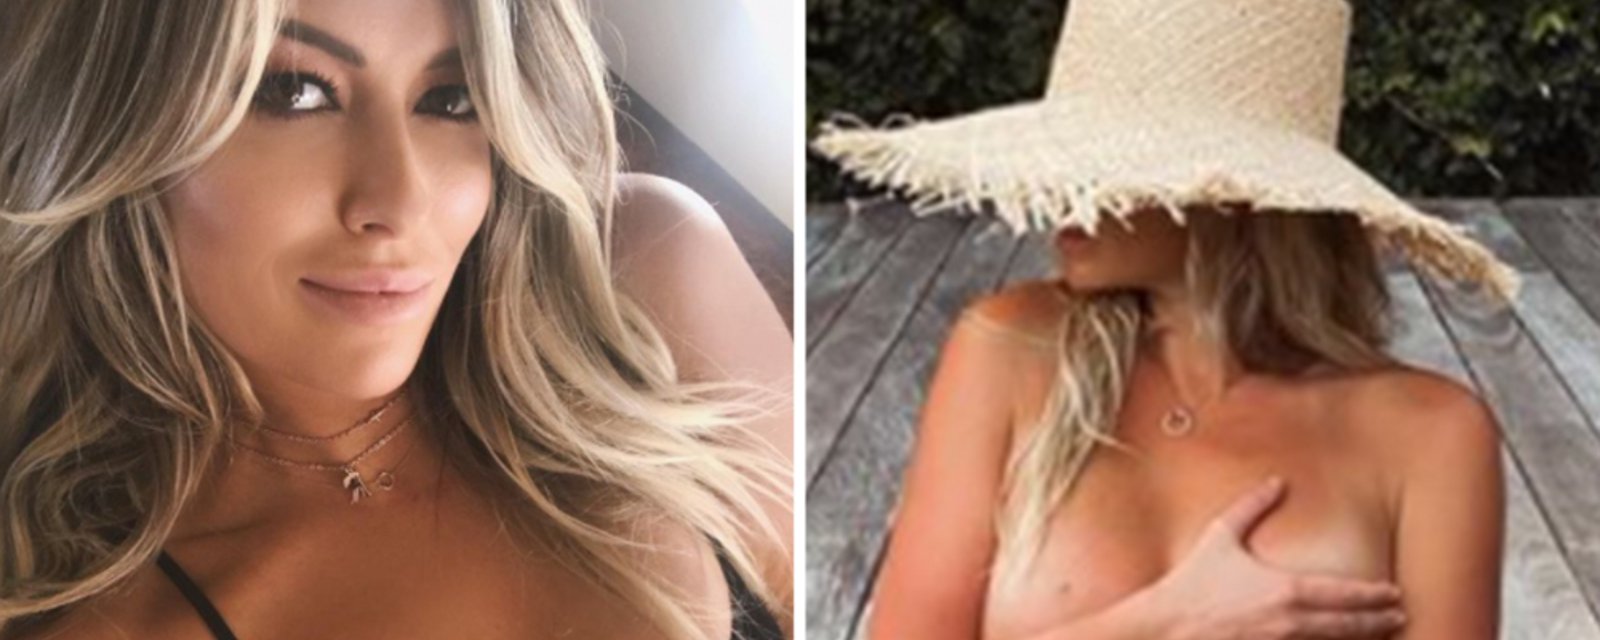 Paulina Gretzky poses fully nude on Instagram